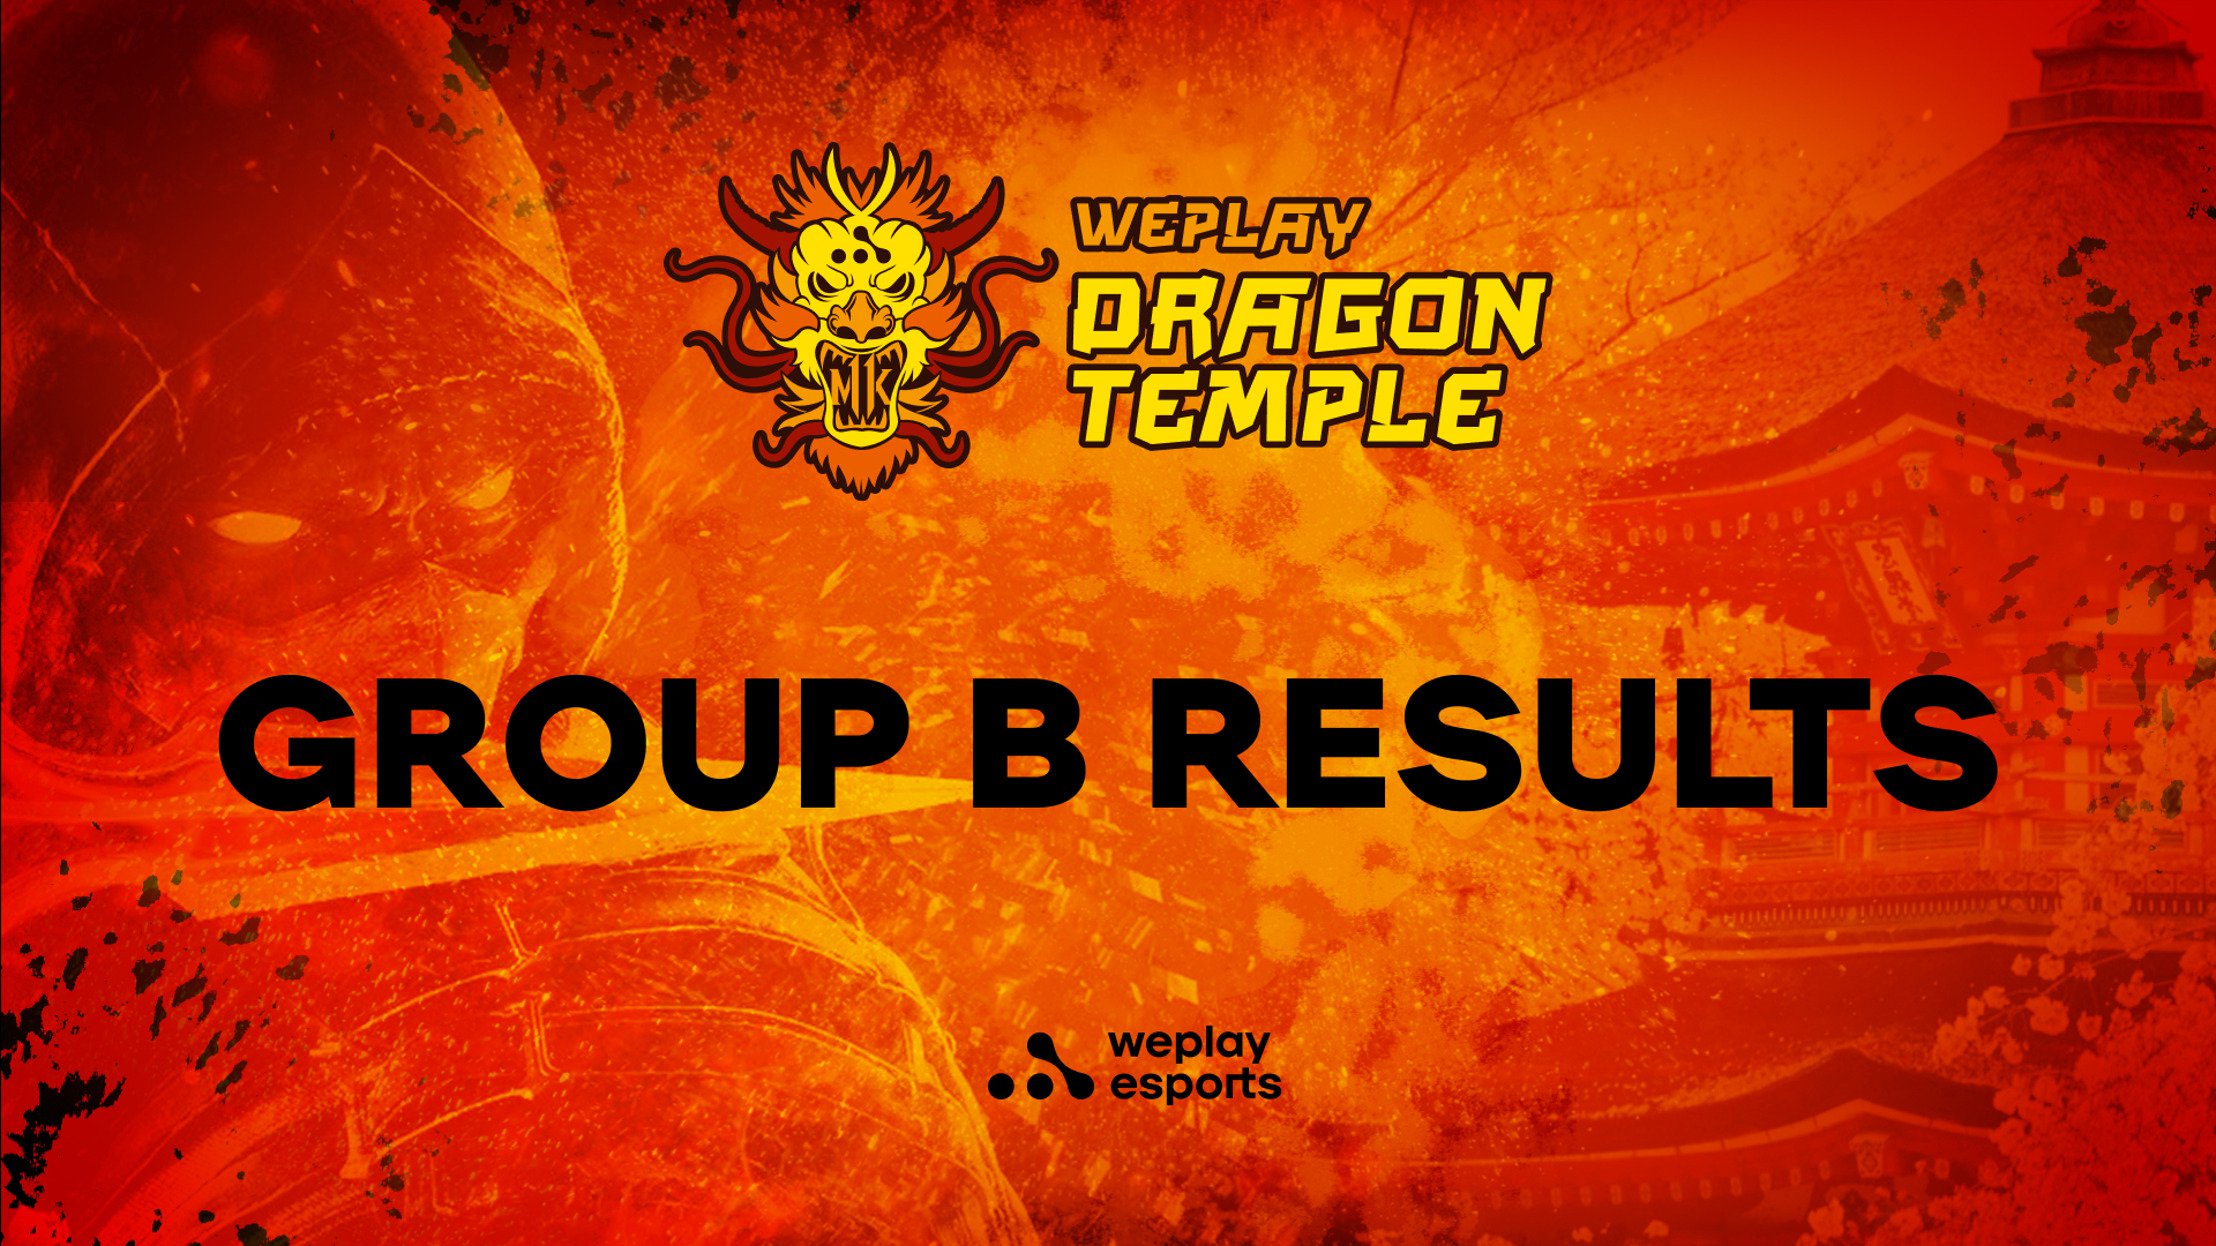 WePlay Dragon Temple Group B Results